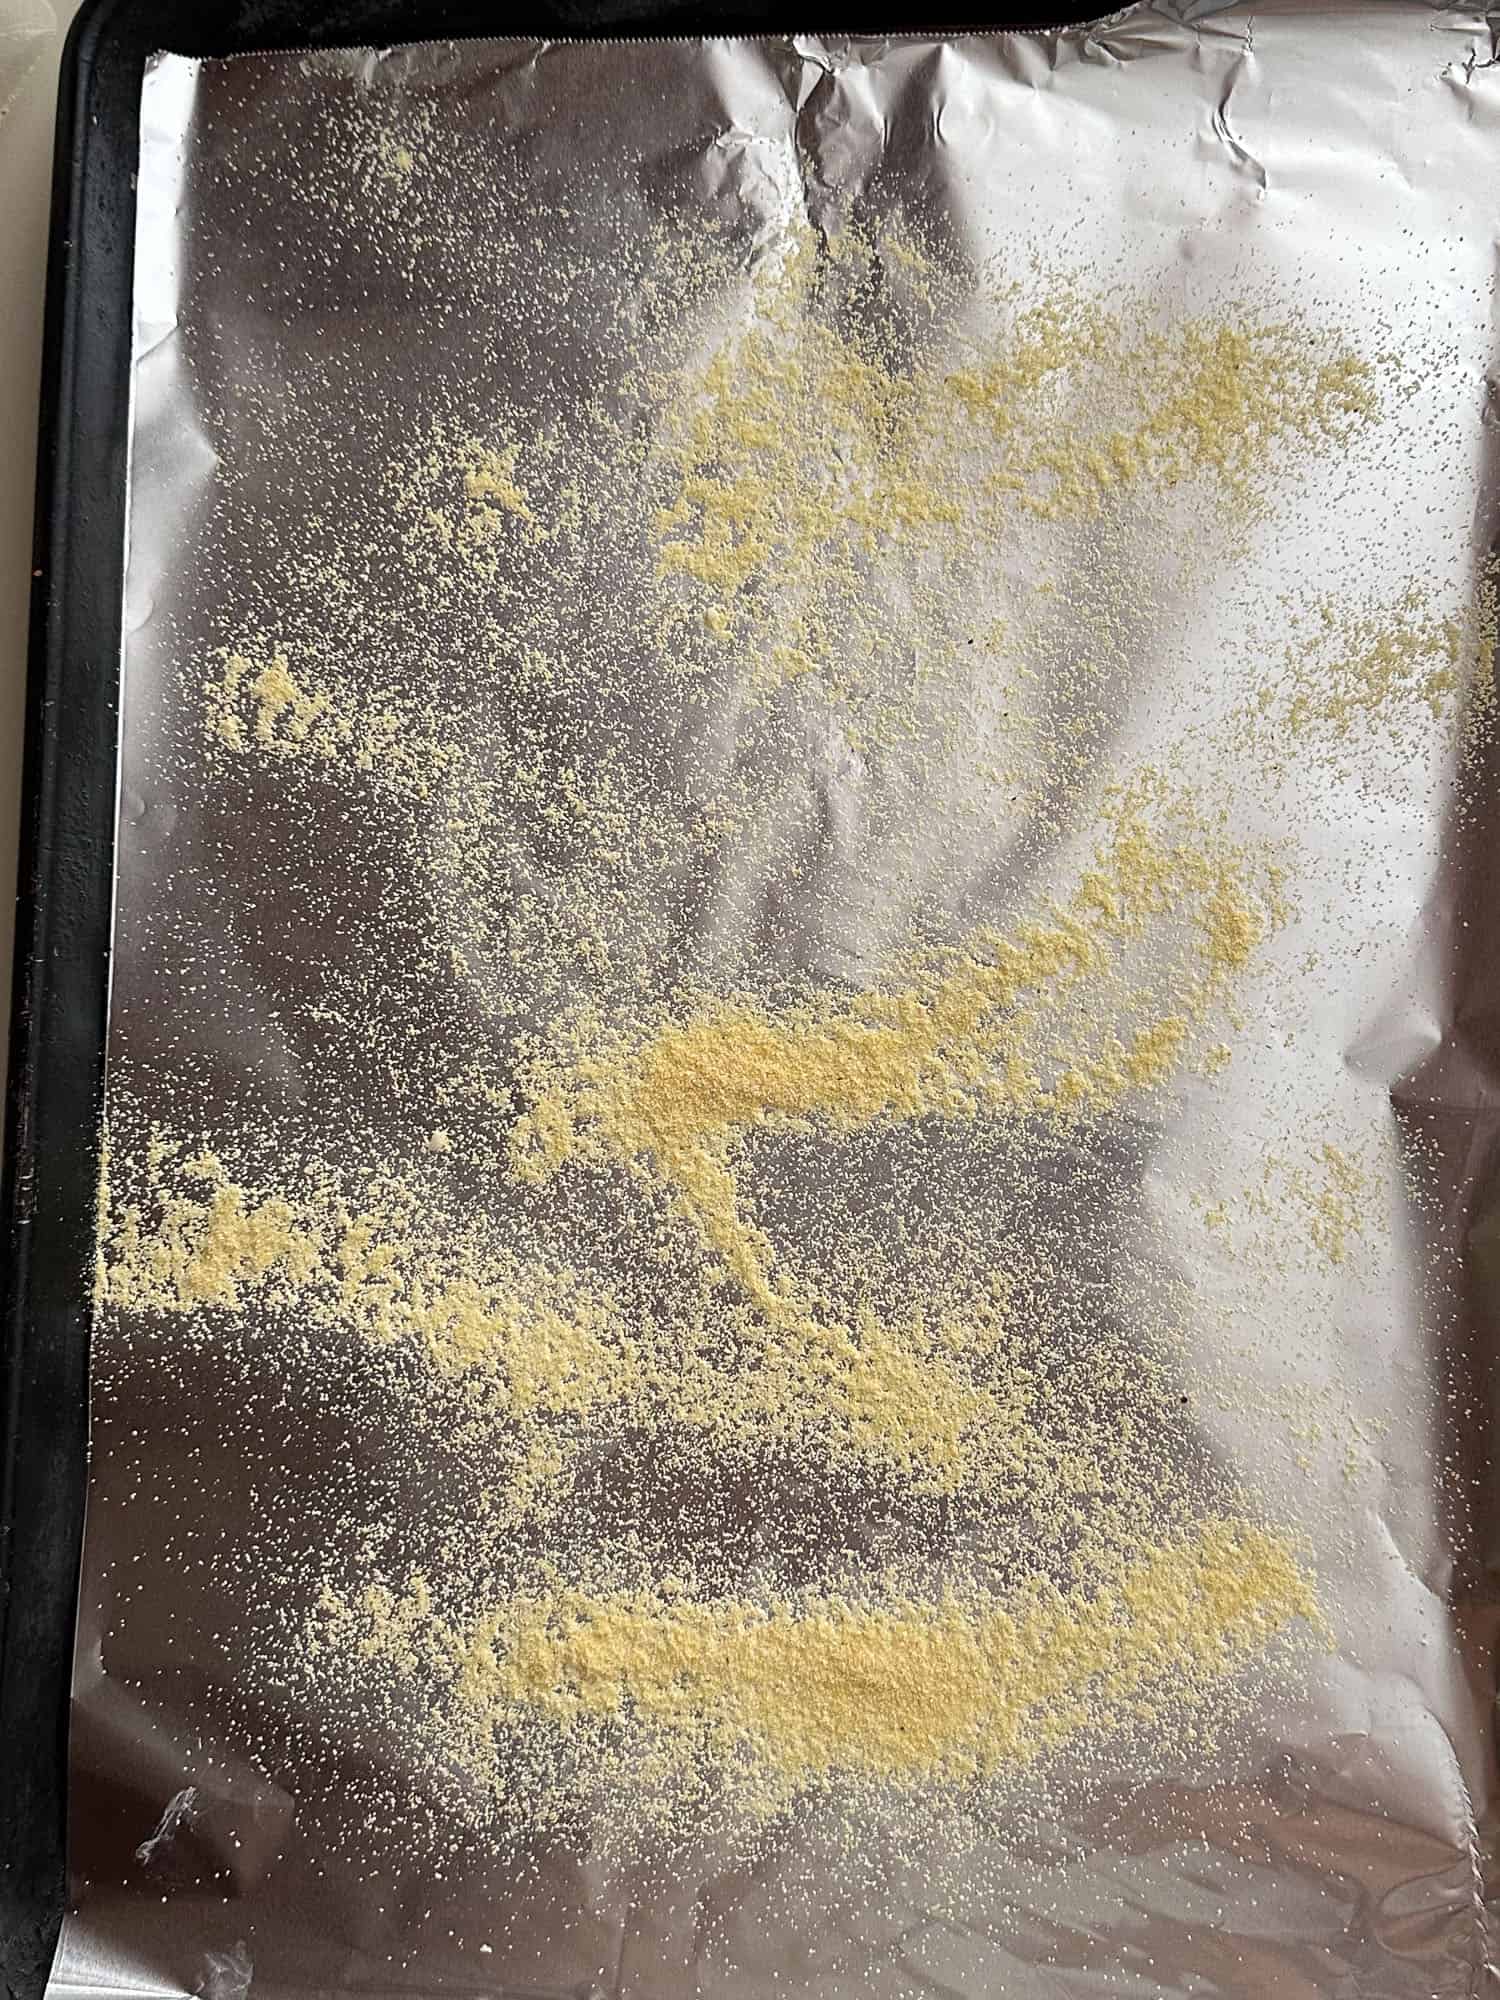 cornmeal sprinkled on baking pan lined with aluminum foil